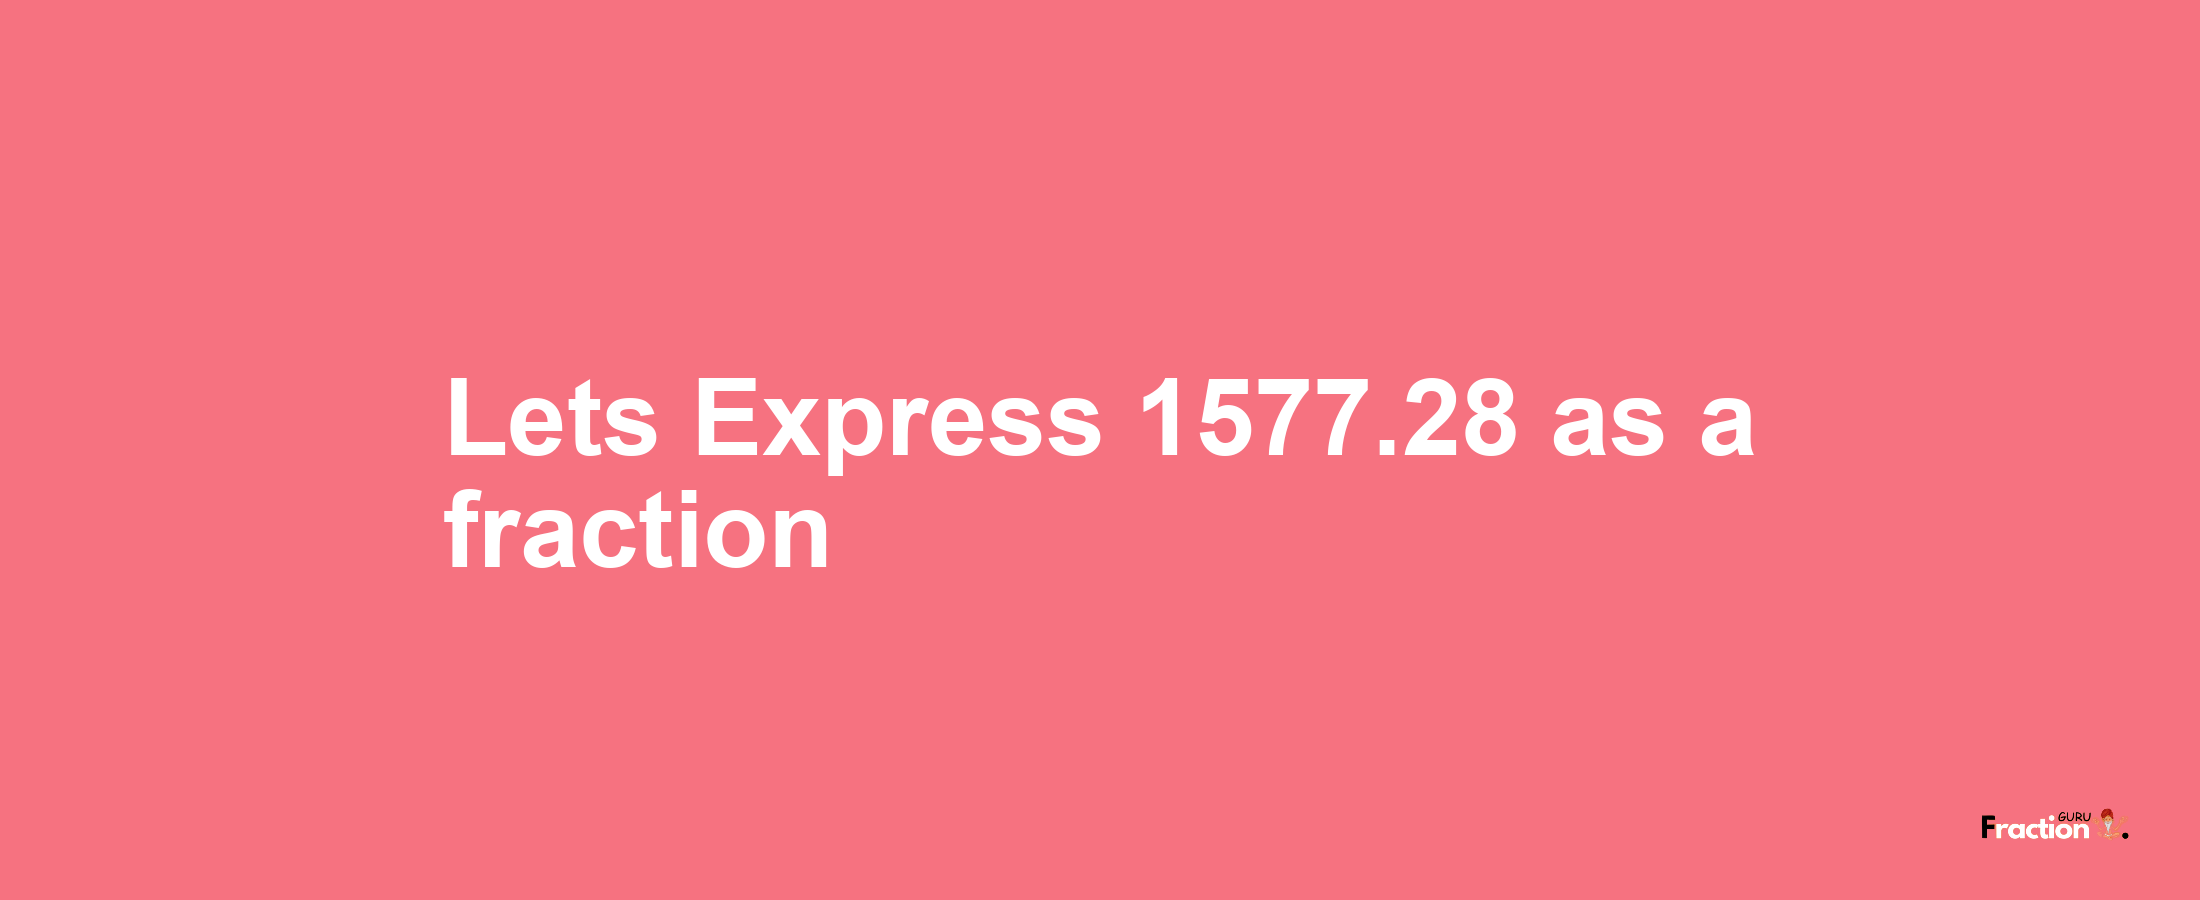 Lets Express 1577.28 as afraction